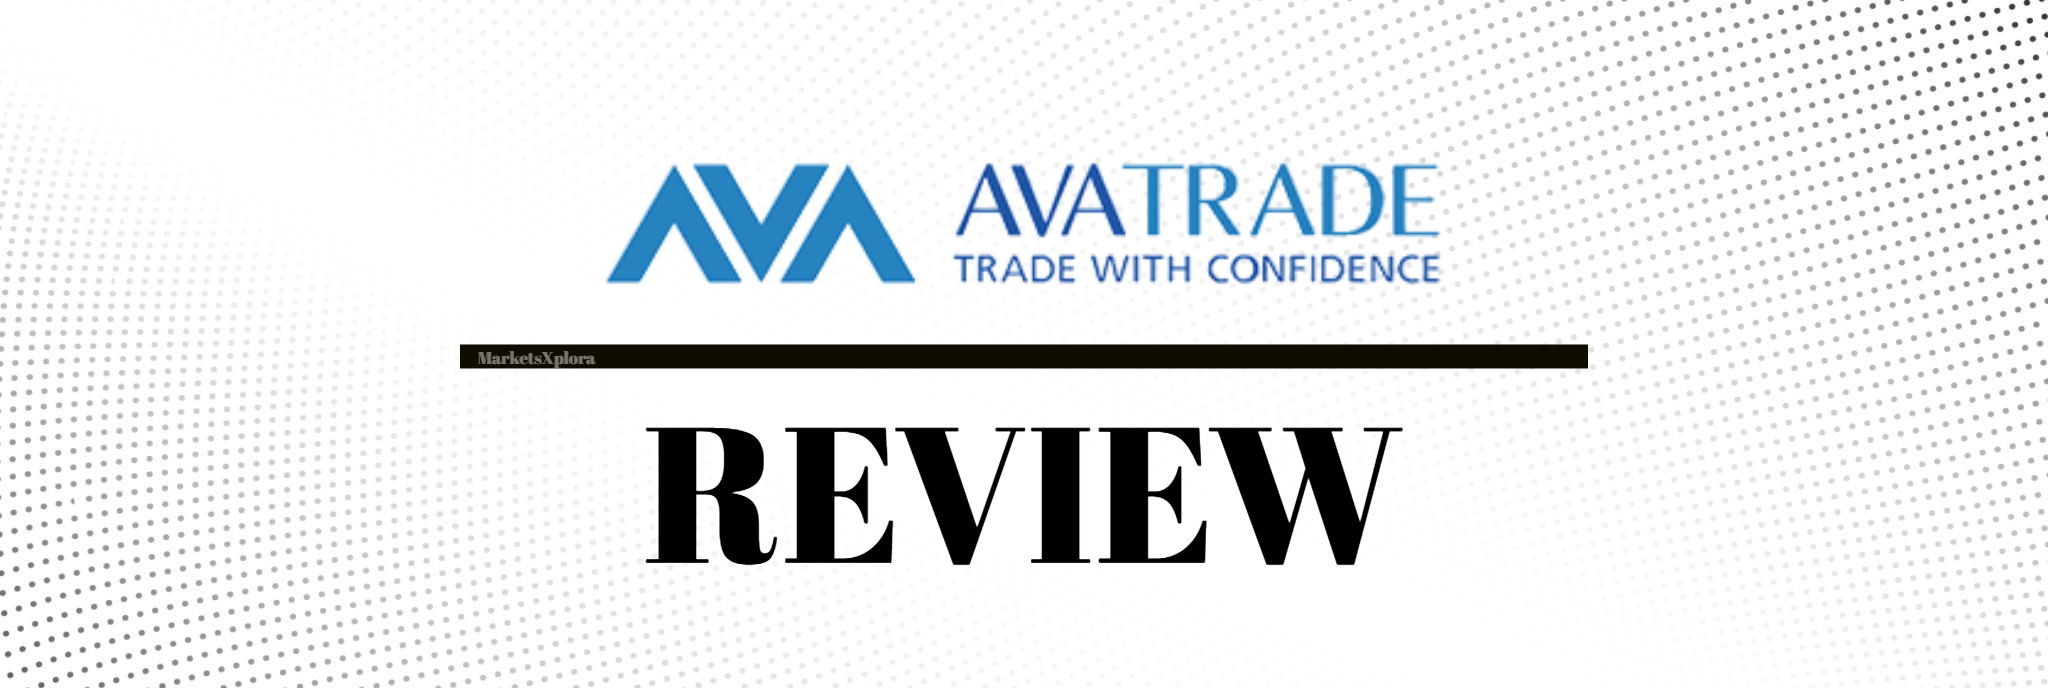 This AvaTrade review covers key highlights including regulation, account types with insurance, funding options, customer support and their focus beyond just crypto.